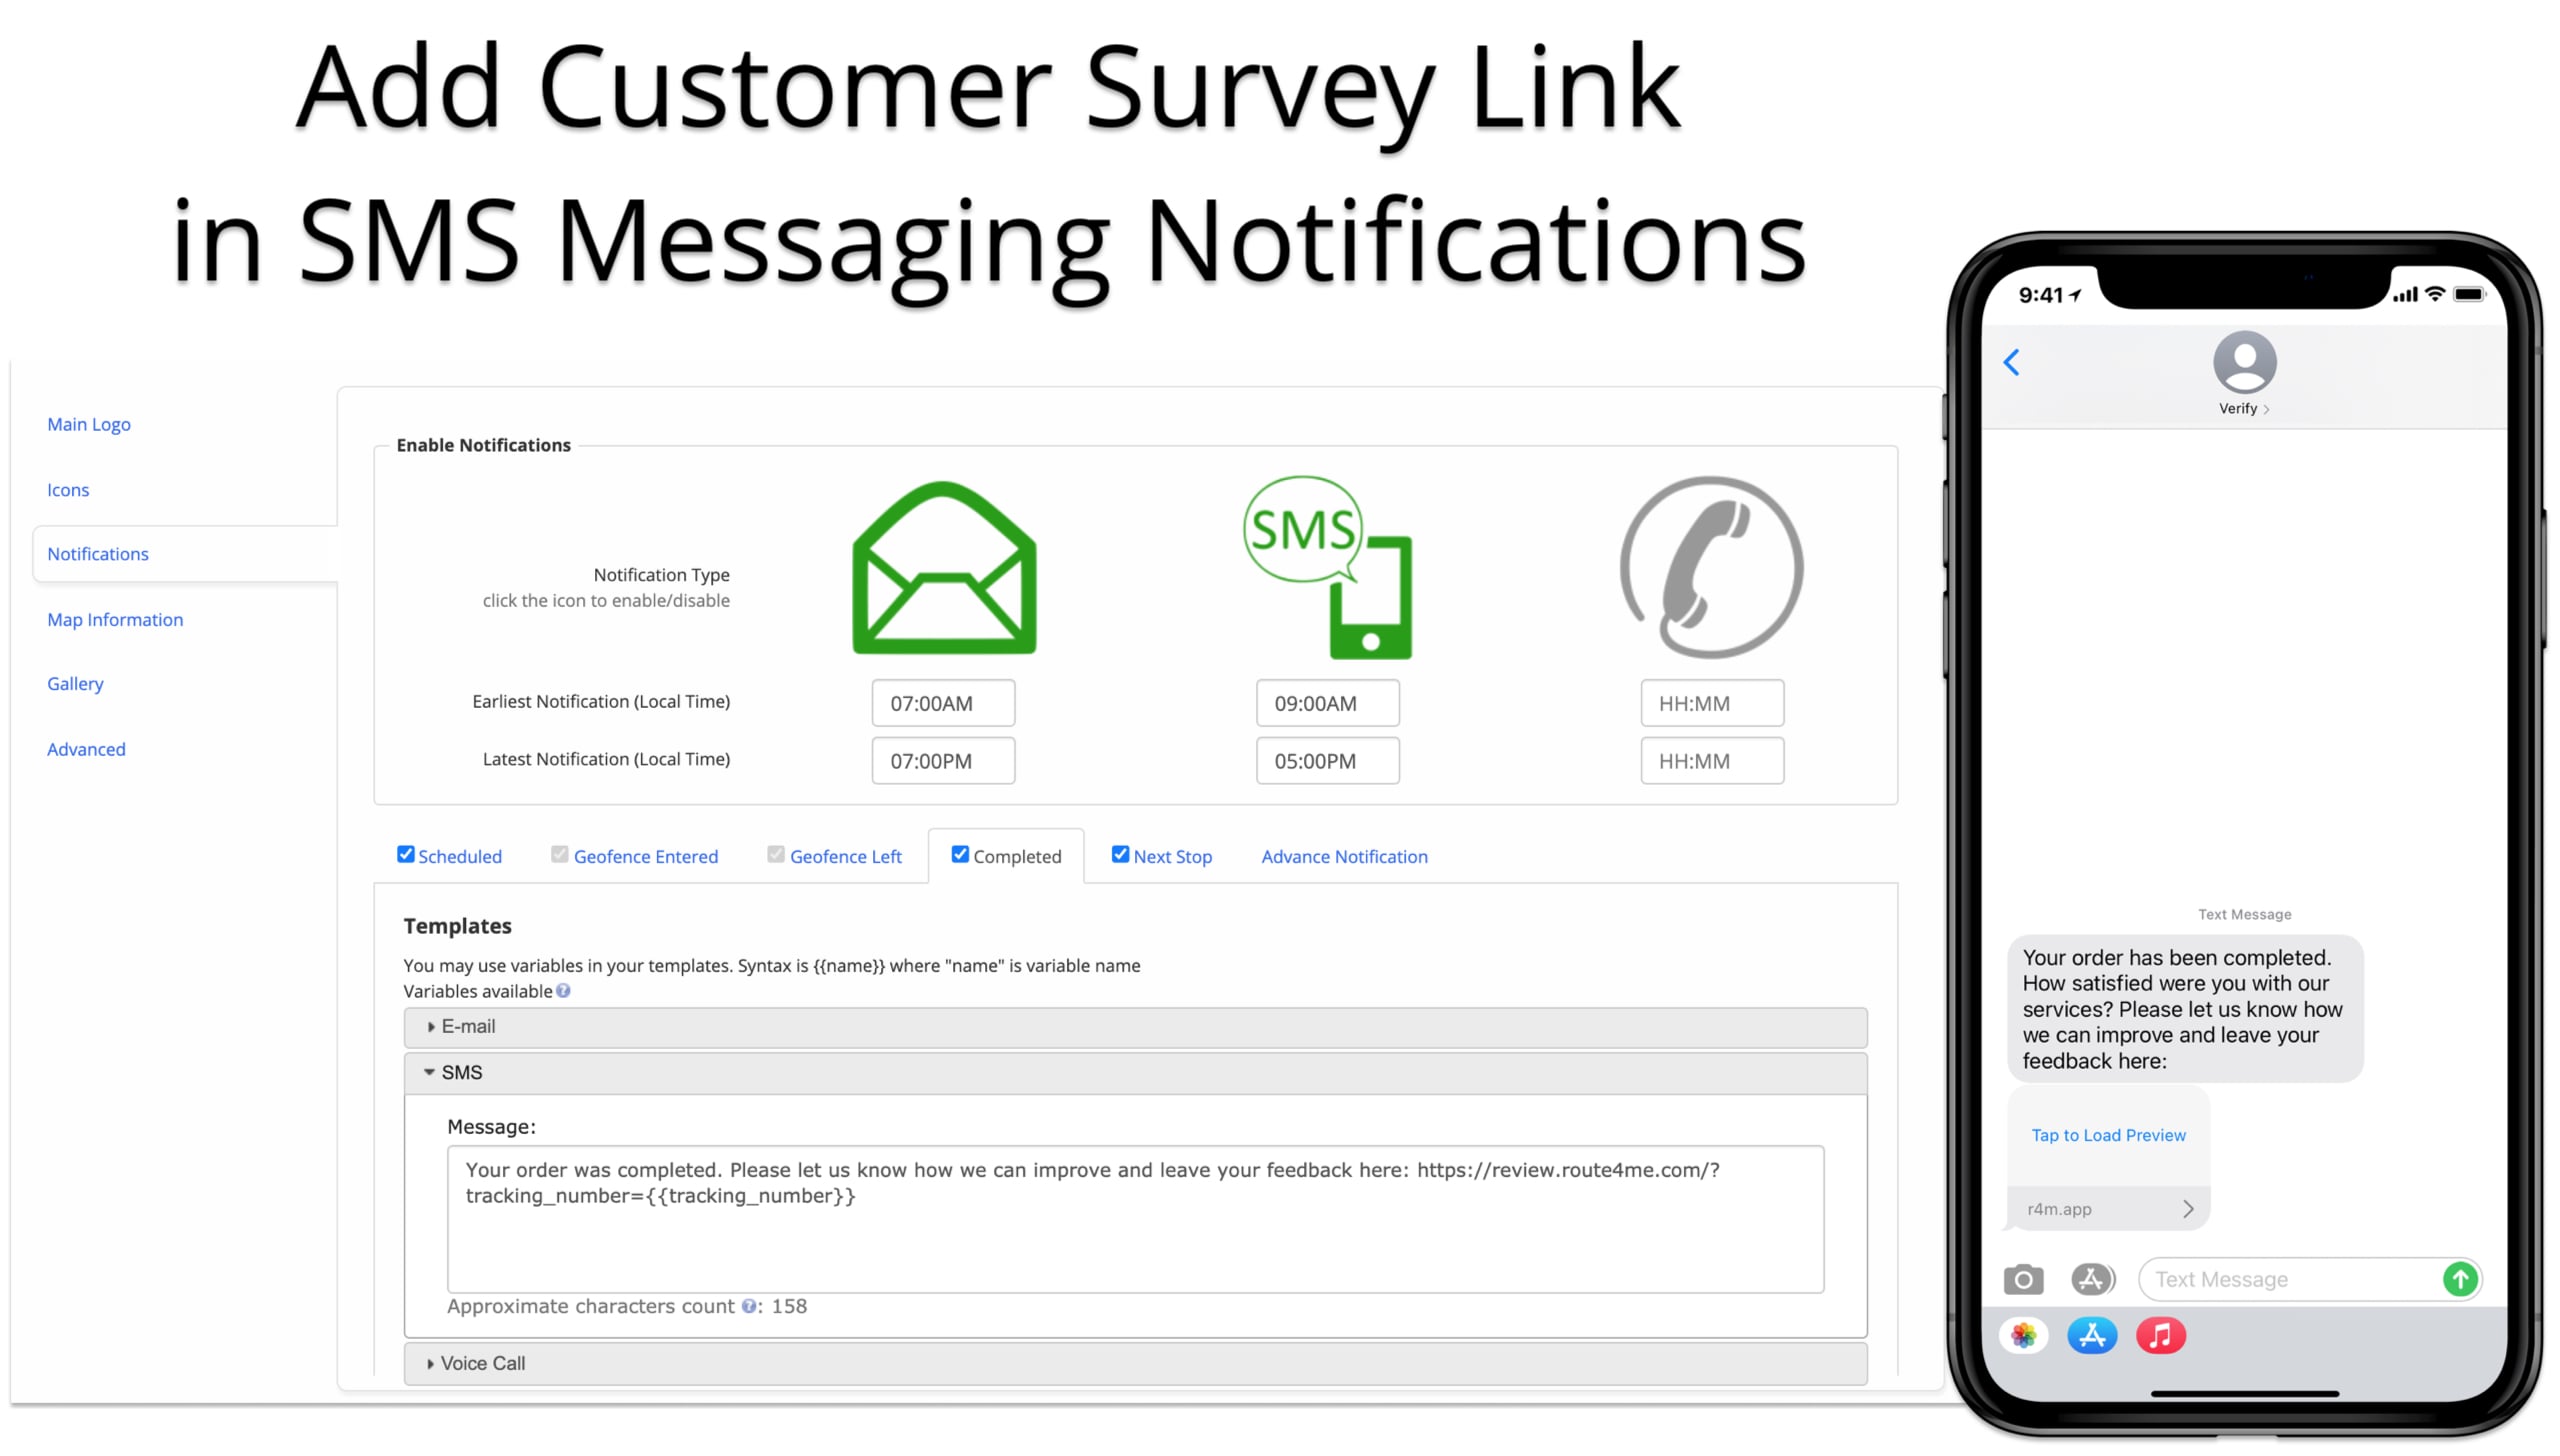 Send driver rating or customer survey page URL in action-triggered SMS notifications.